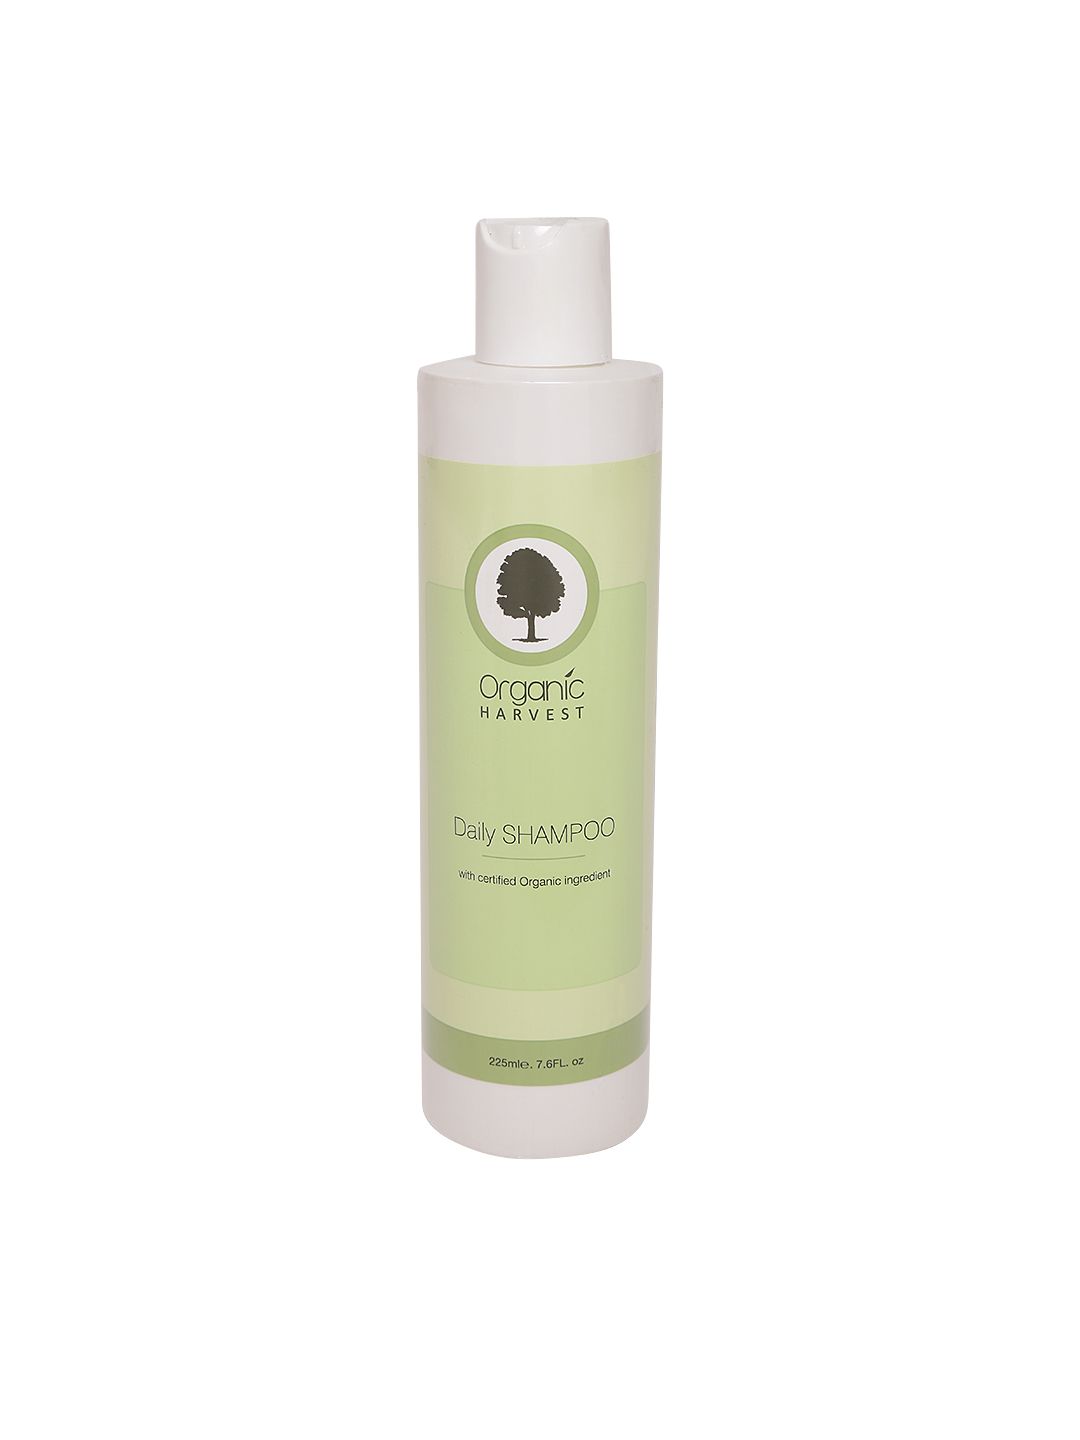 Organic Harvest Daily Shampoo with Certified Organic Ingredient 225 ml Price in India